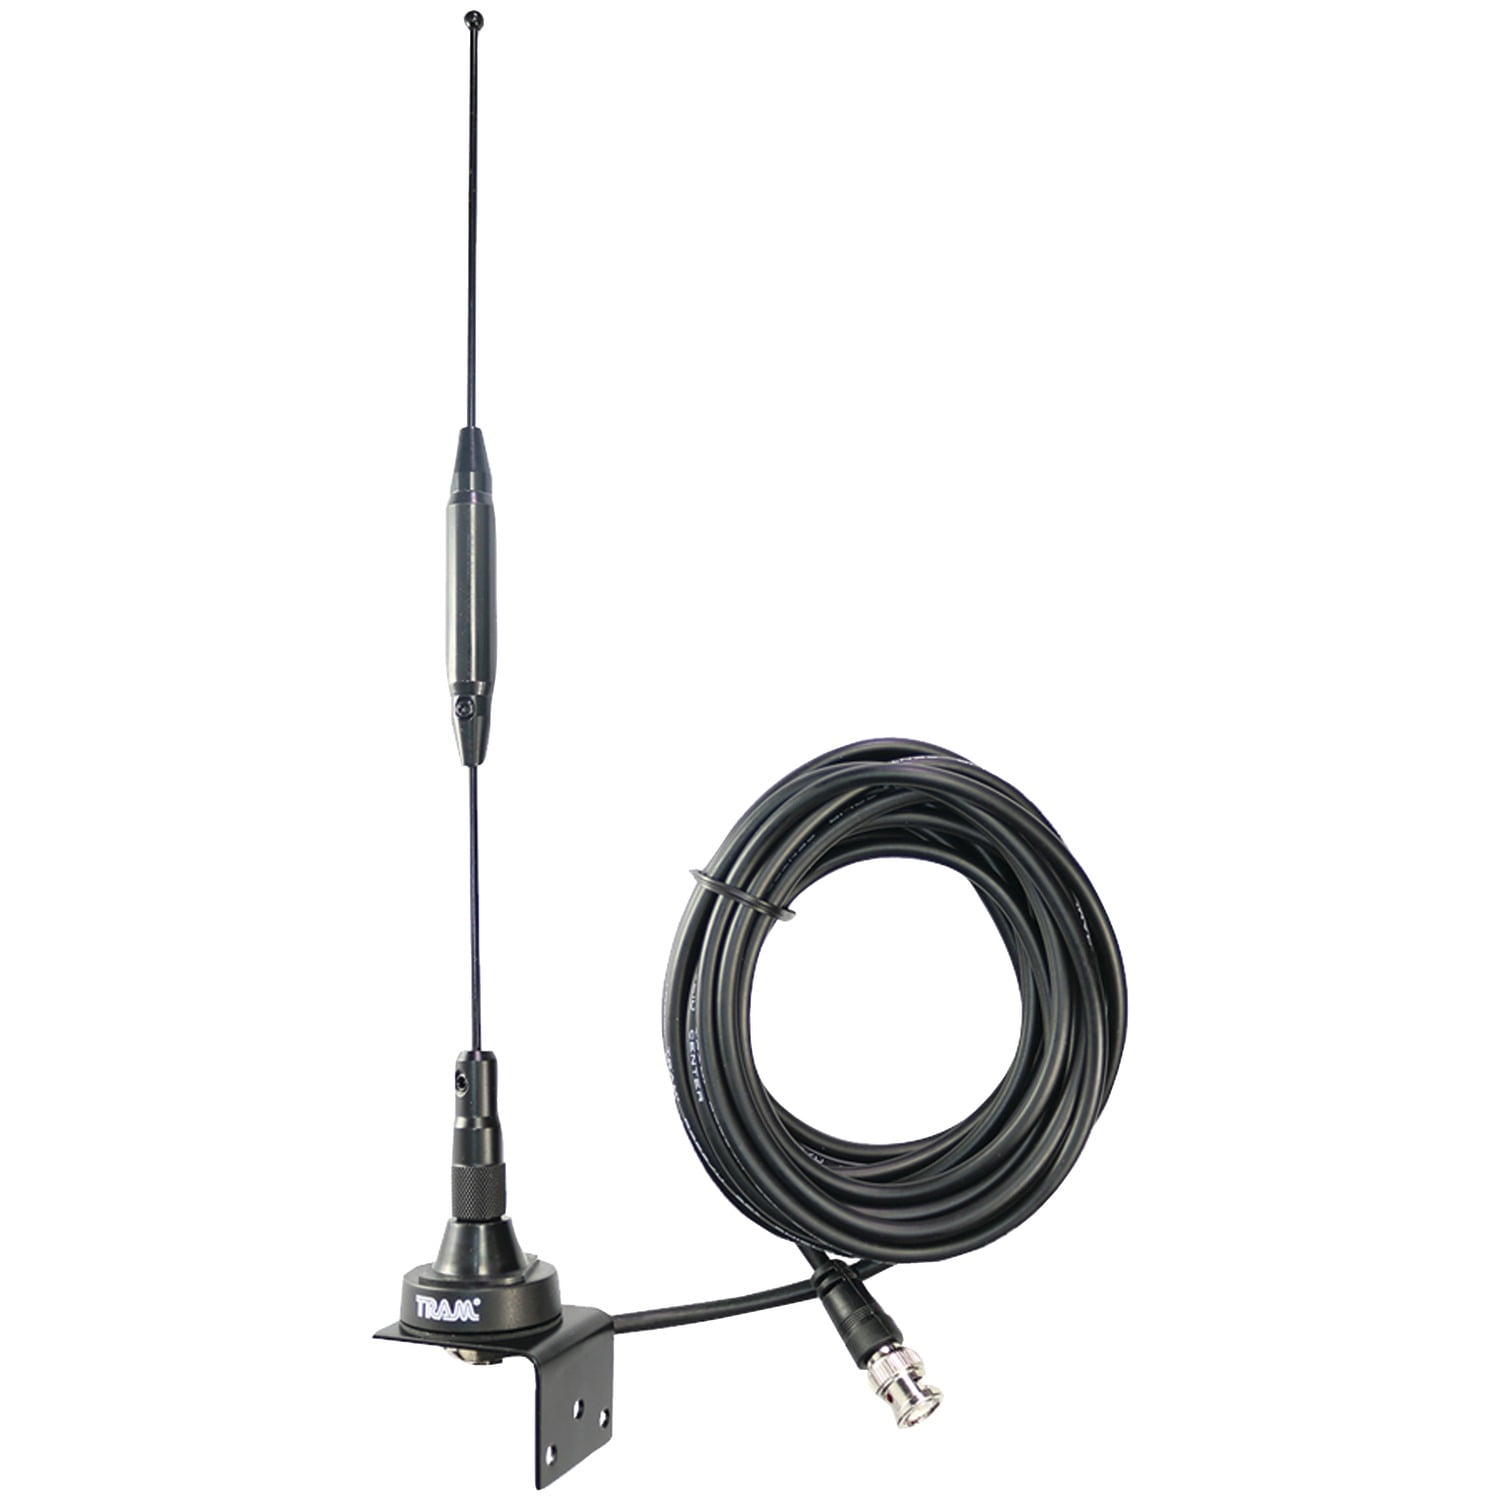 Antenna/Fixed Mount Spring Loaded Base/17 Cable With Unattached Bnc Connector